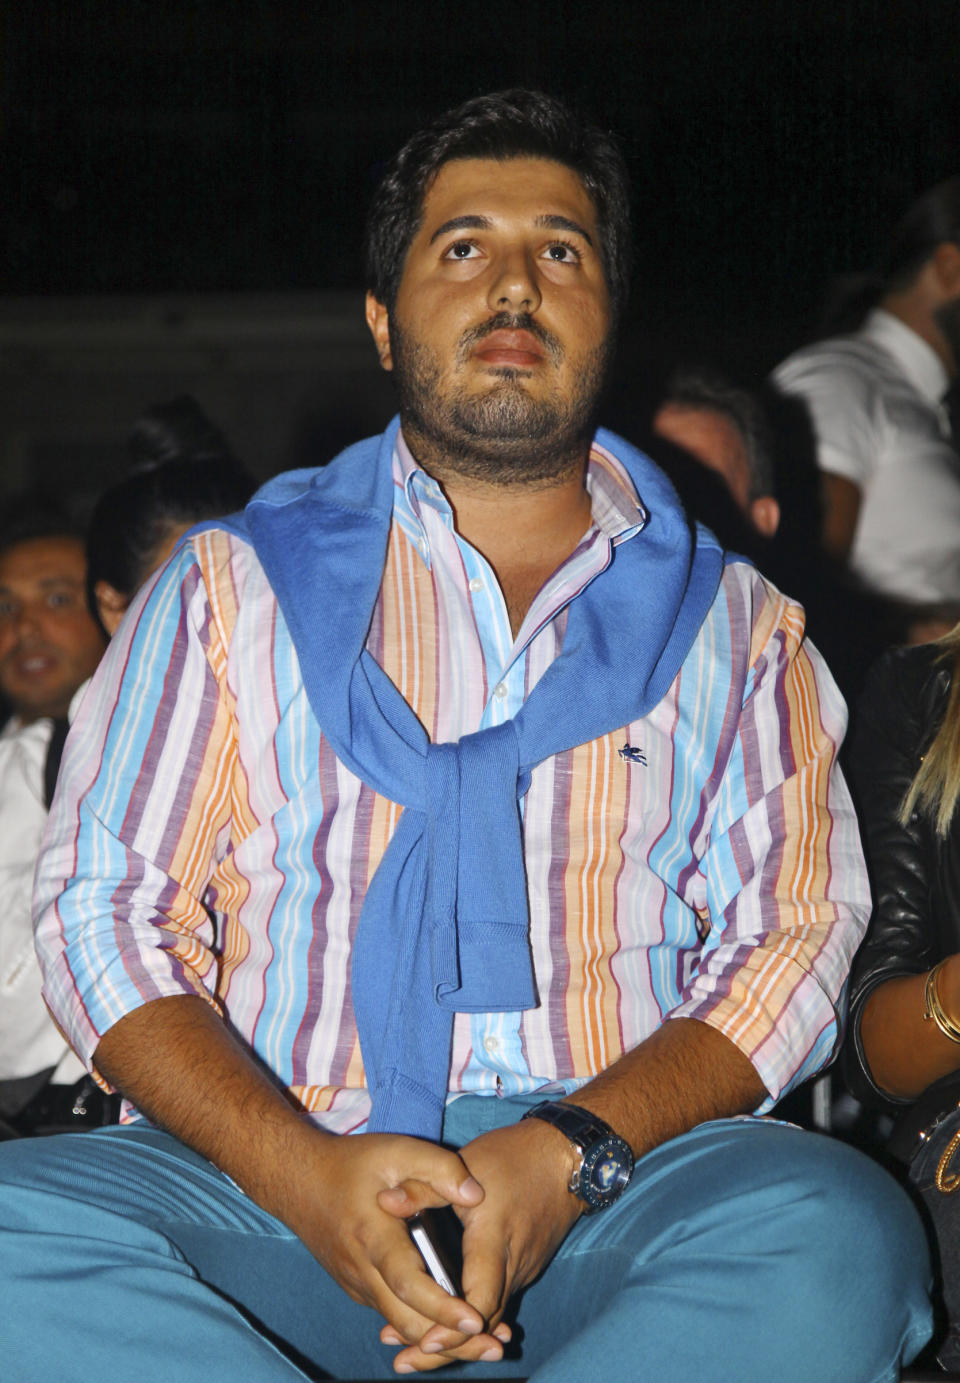 Turkish-Iranian businessman Reza Zarrab, charged in the U.S. for evading sanctions on Iran, watches a concert in Istanbul on Sept 8, 2013. (Photo: Depo Photos via AP)